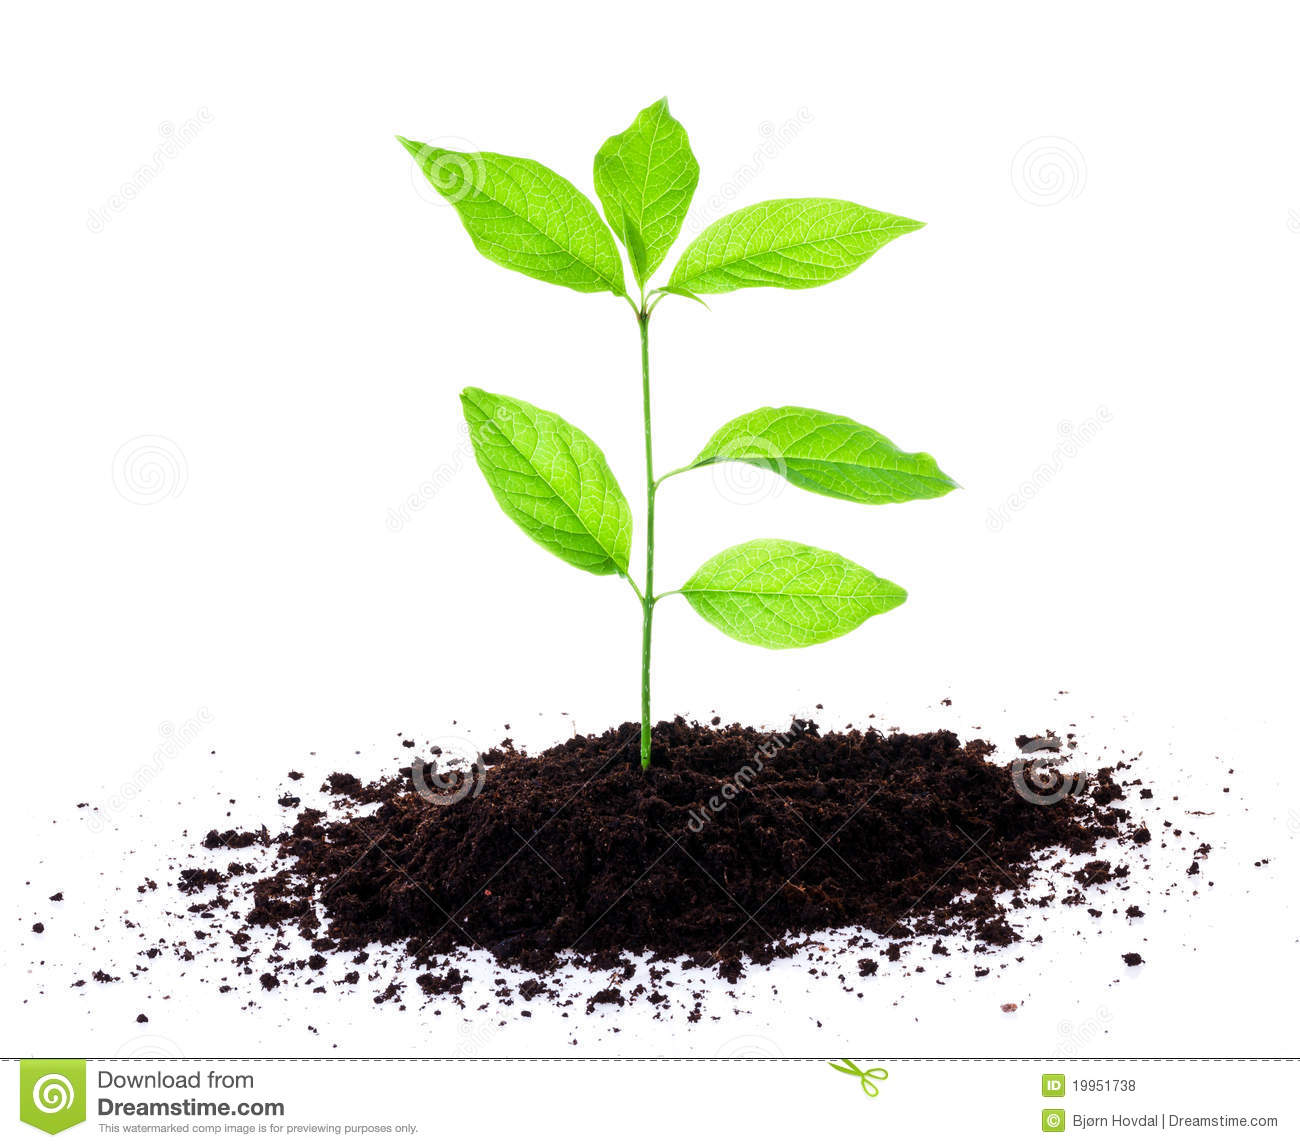 Plant Growing In Soil Royalty Free Stock Photos   Image  19951738